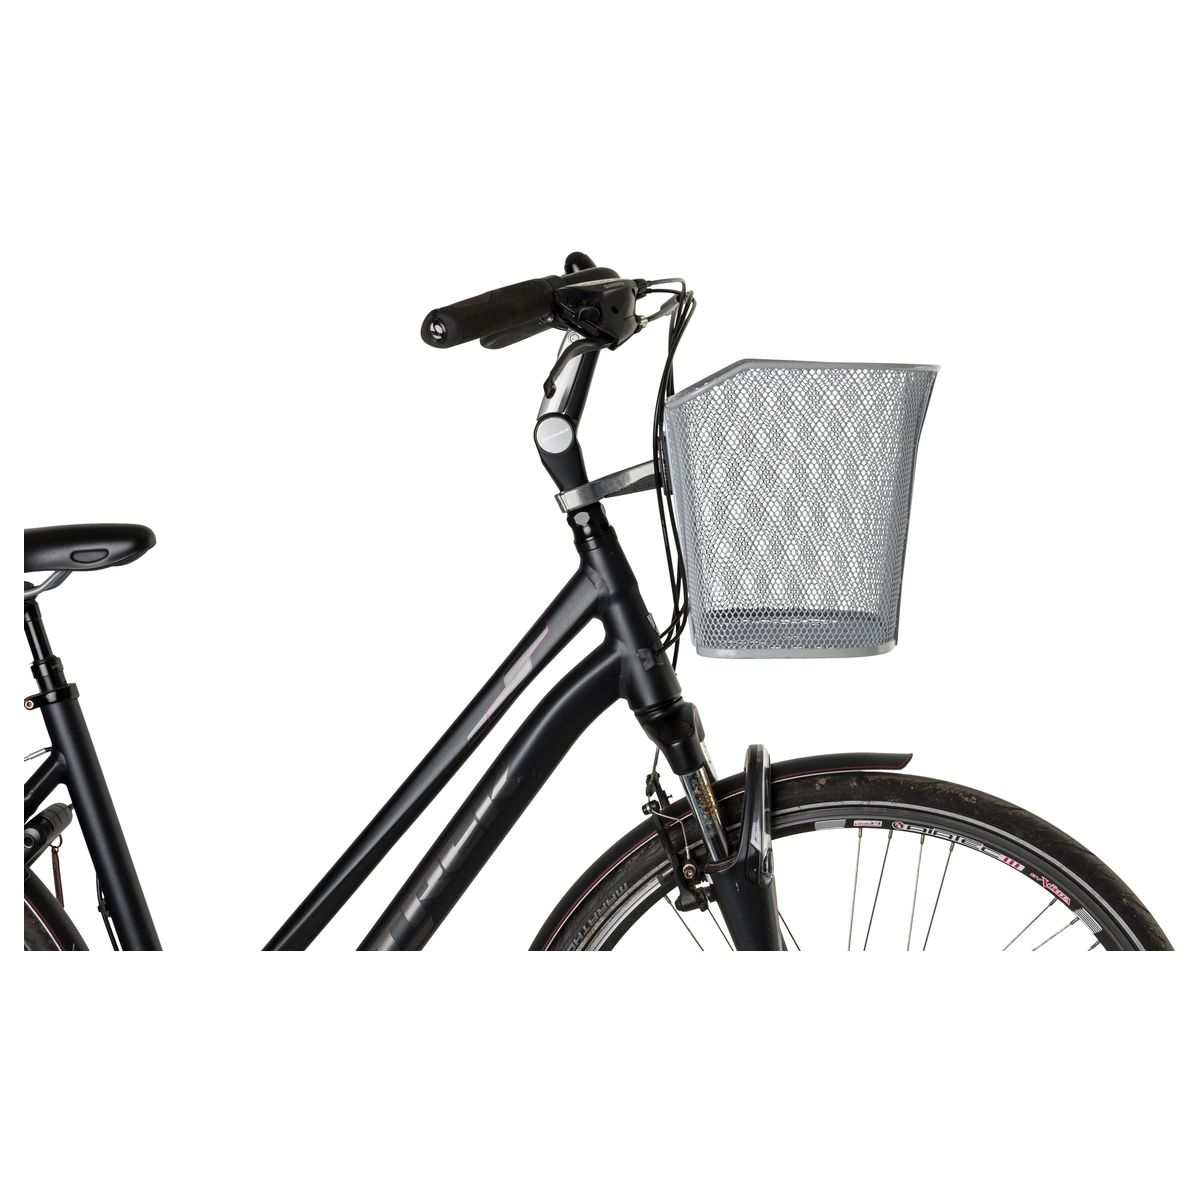 Fastrider Betuwe Bicycle basket Non-Detachable fit example